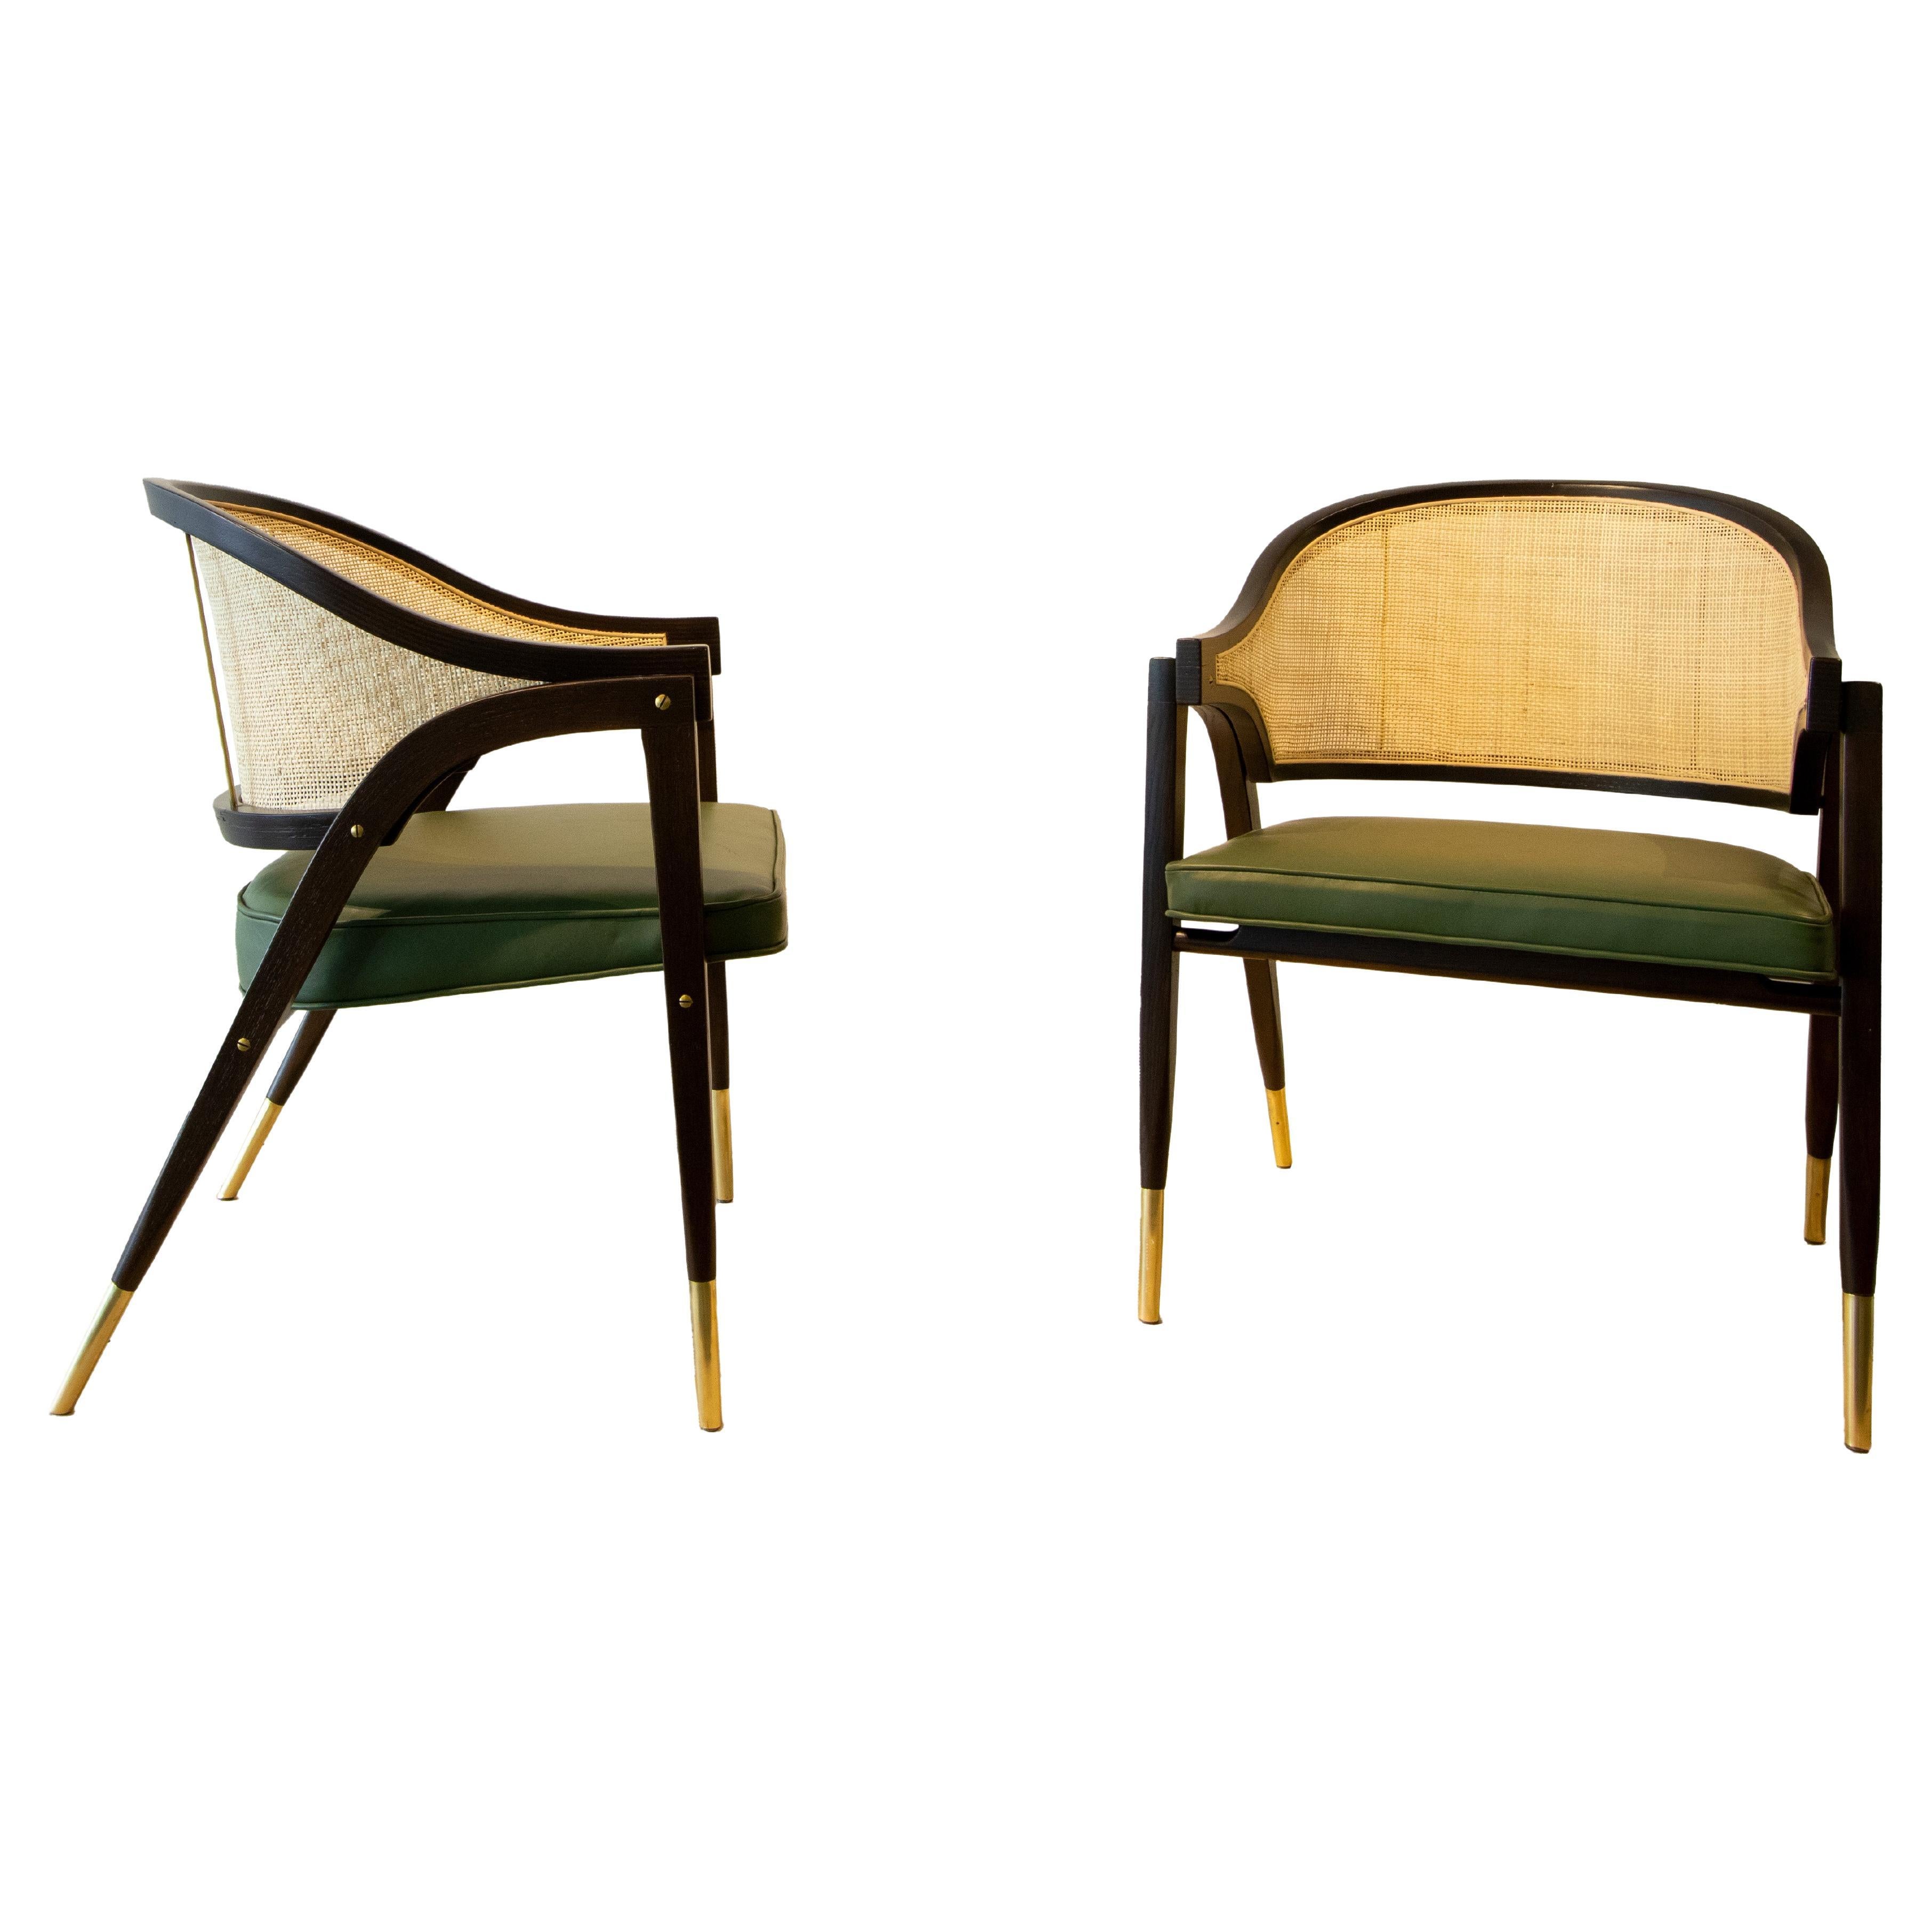 A pair of Model 5480 brass stiletto cane chairs designed by Edward Wormley for Dunbar Furniture. Details are everything, and nothing was skipped in this design. With exposed brass hardware, Brass stretchers, bentwood legs that curve into the arm,